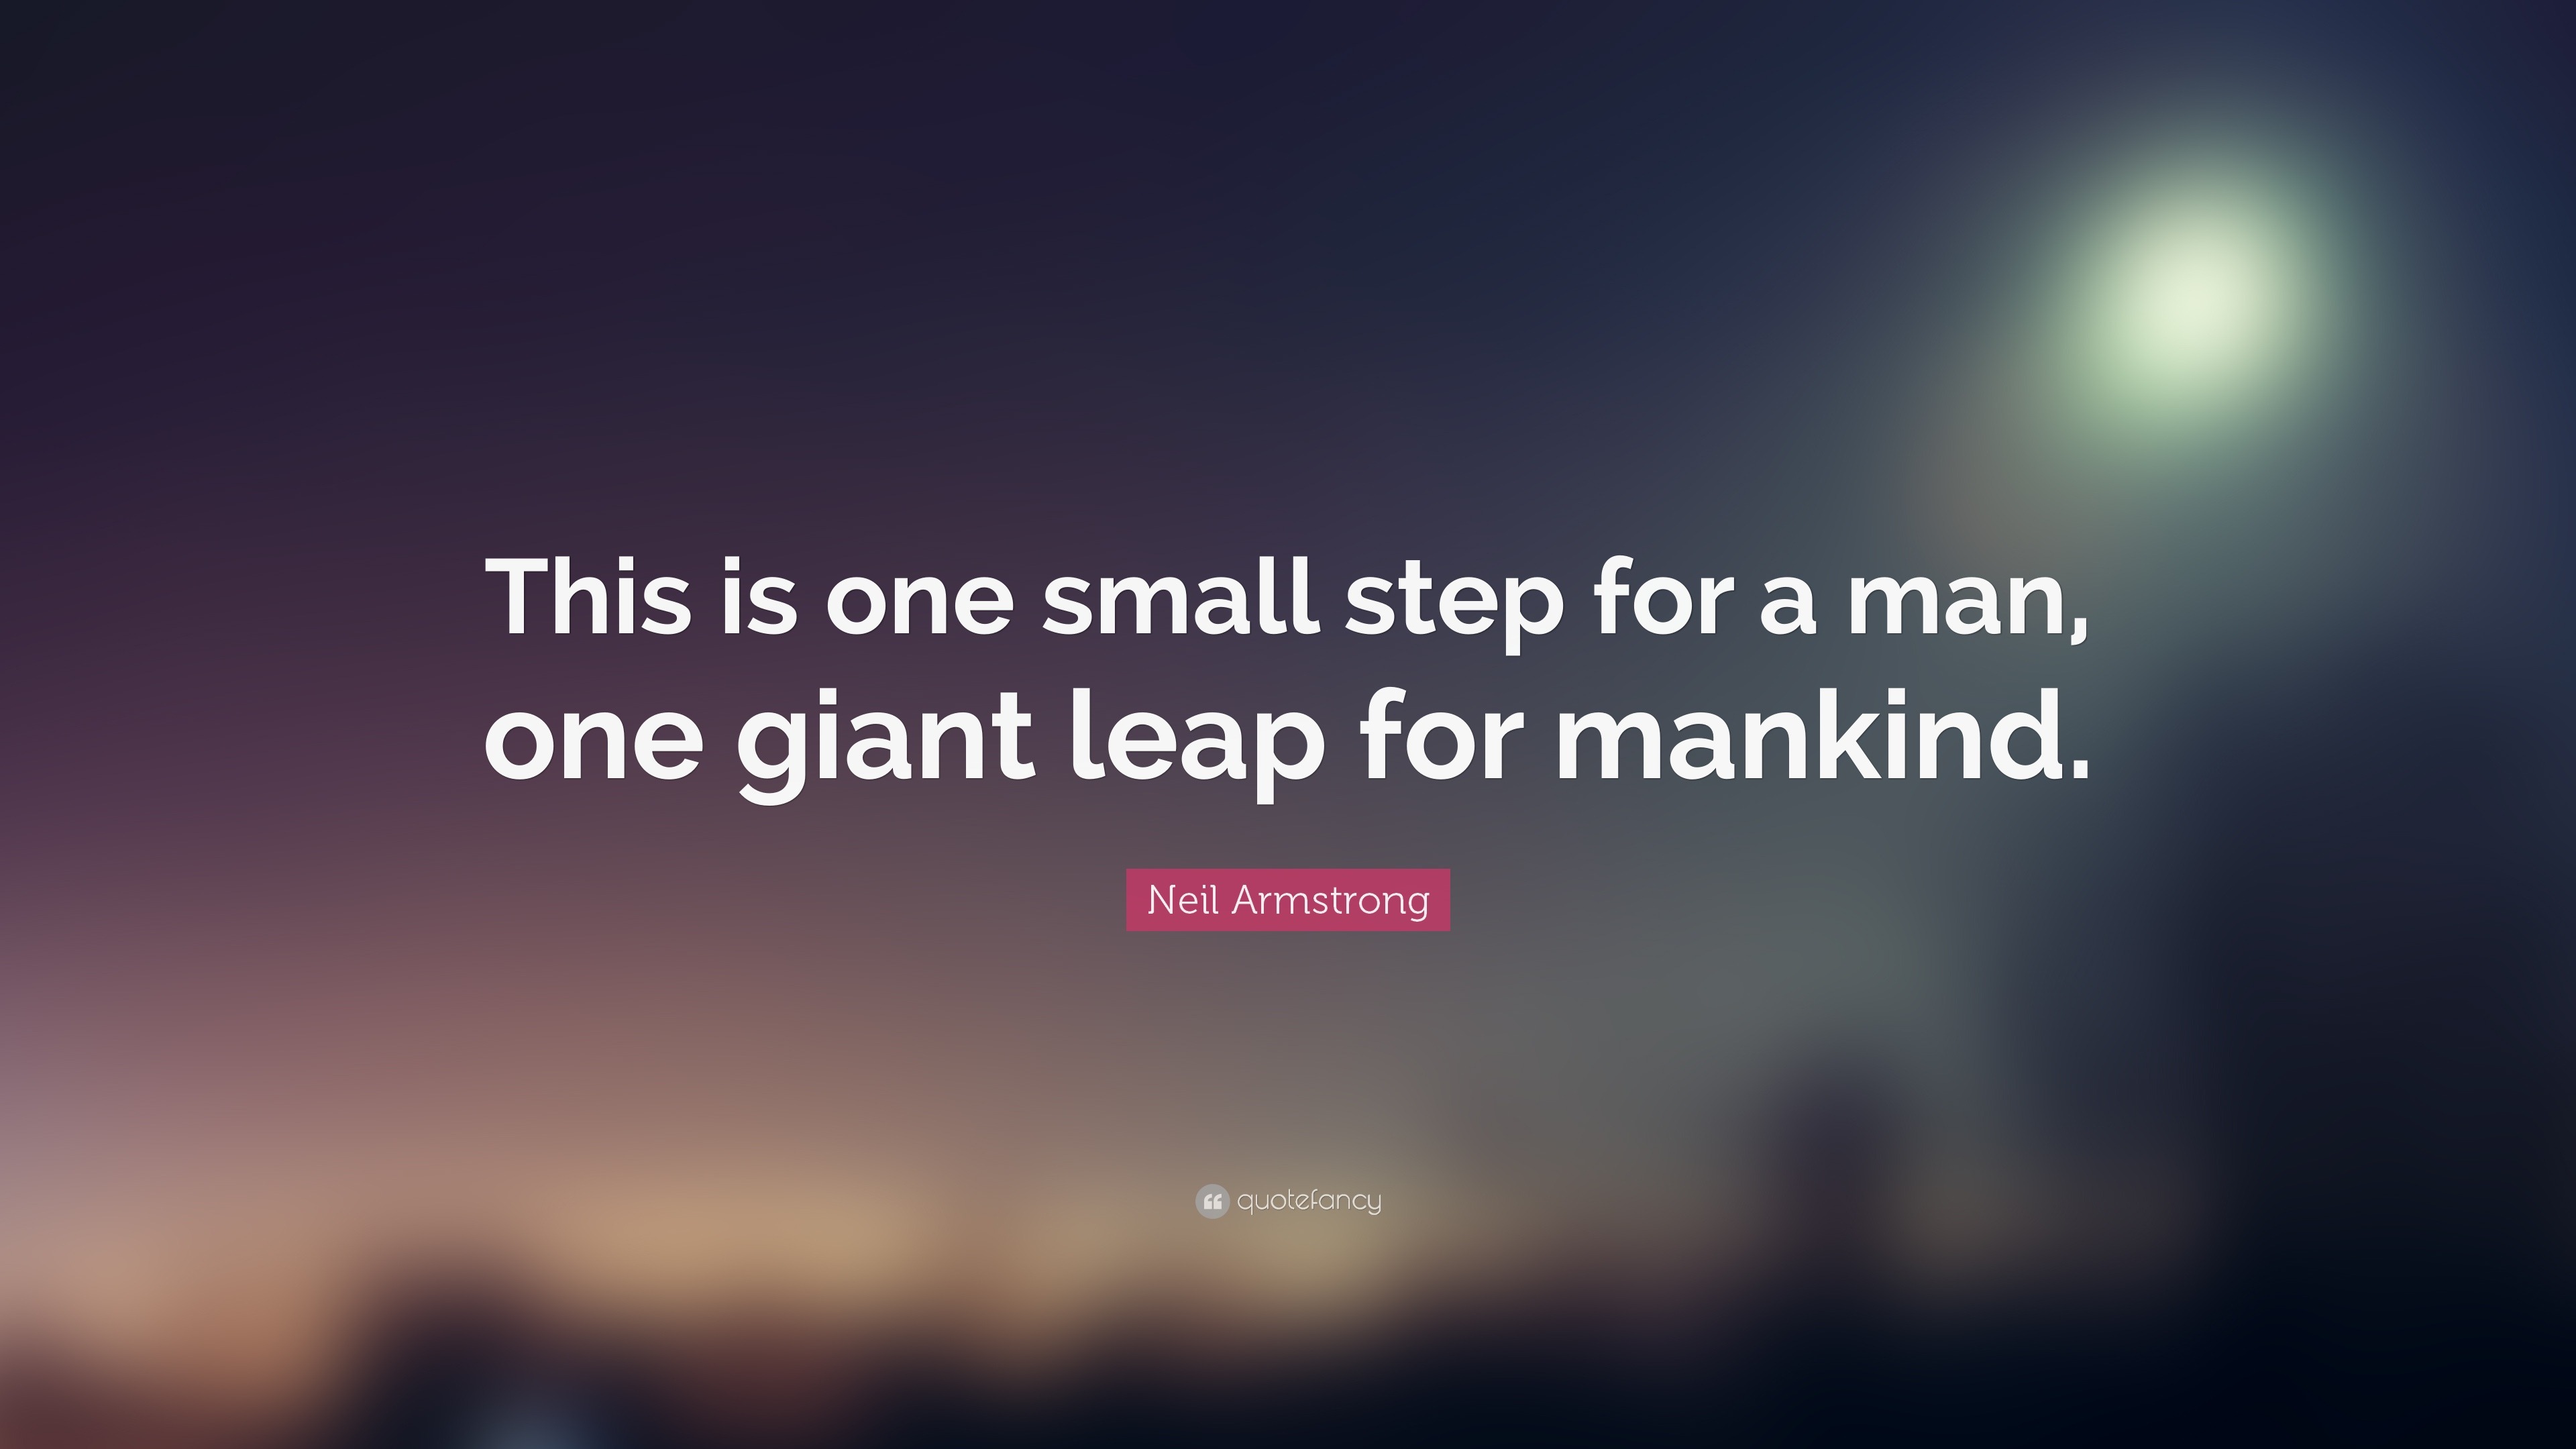 Neil Armstrong Quote Image